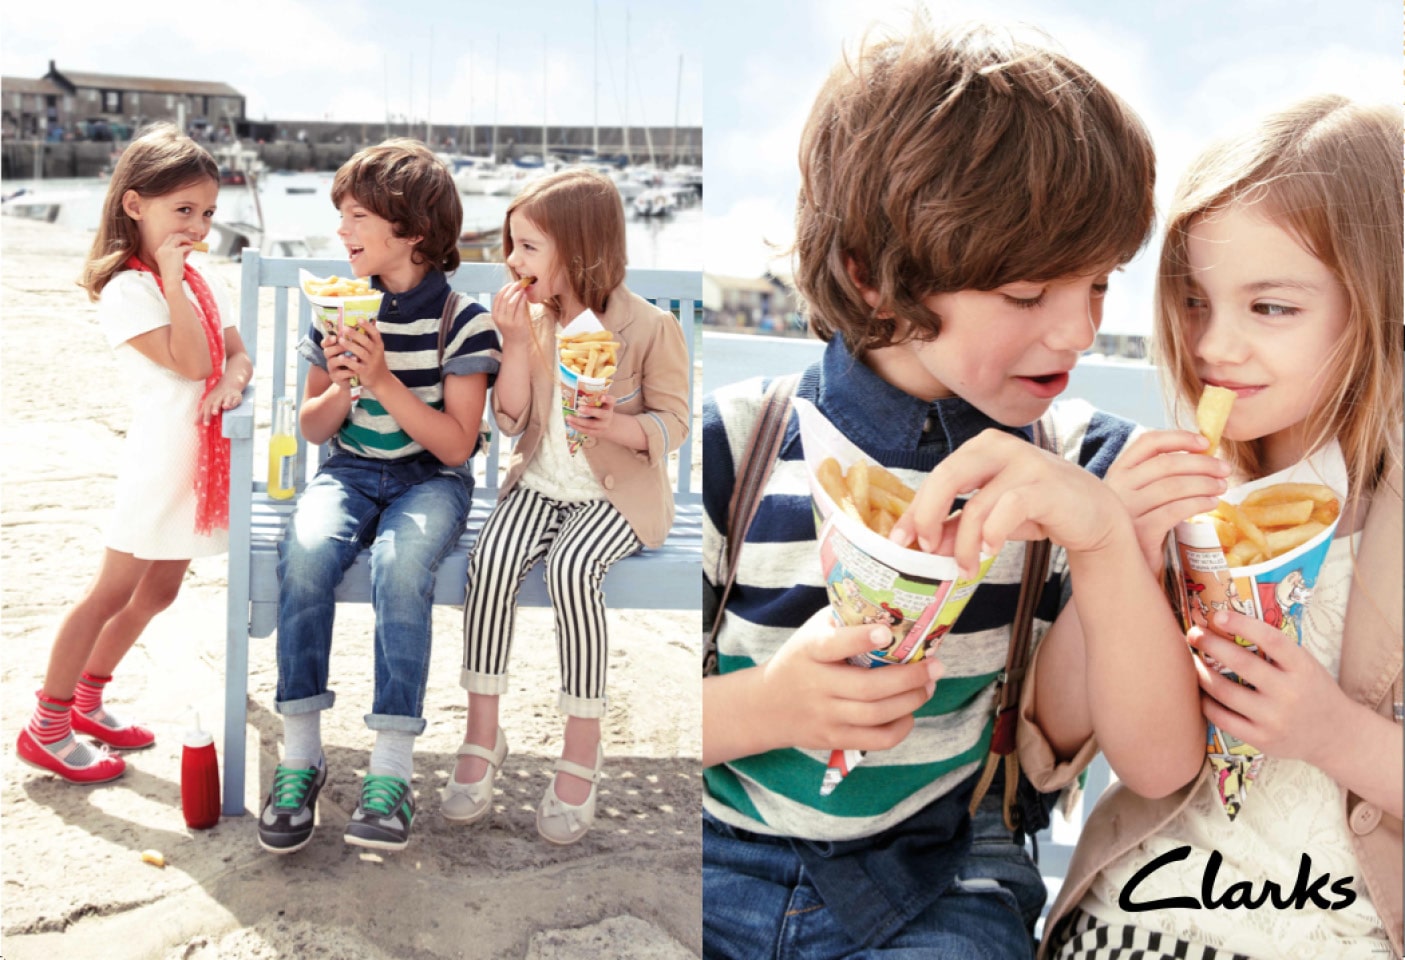 Clarks Shoes Kids Campaign - Photographer, Stylist, Hair and / Manchester +